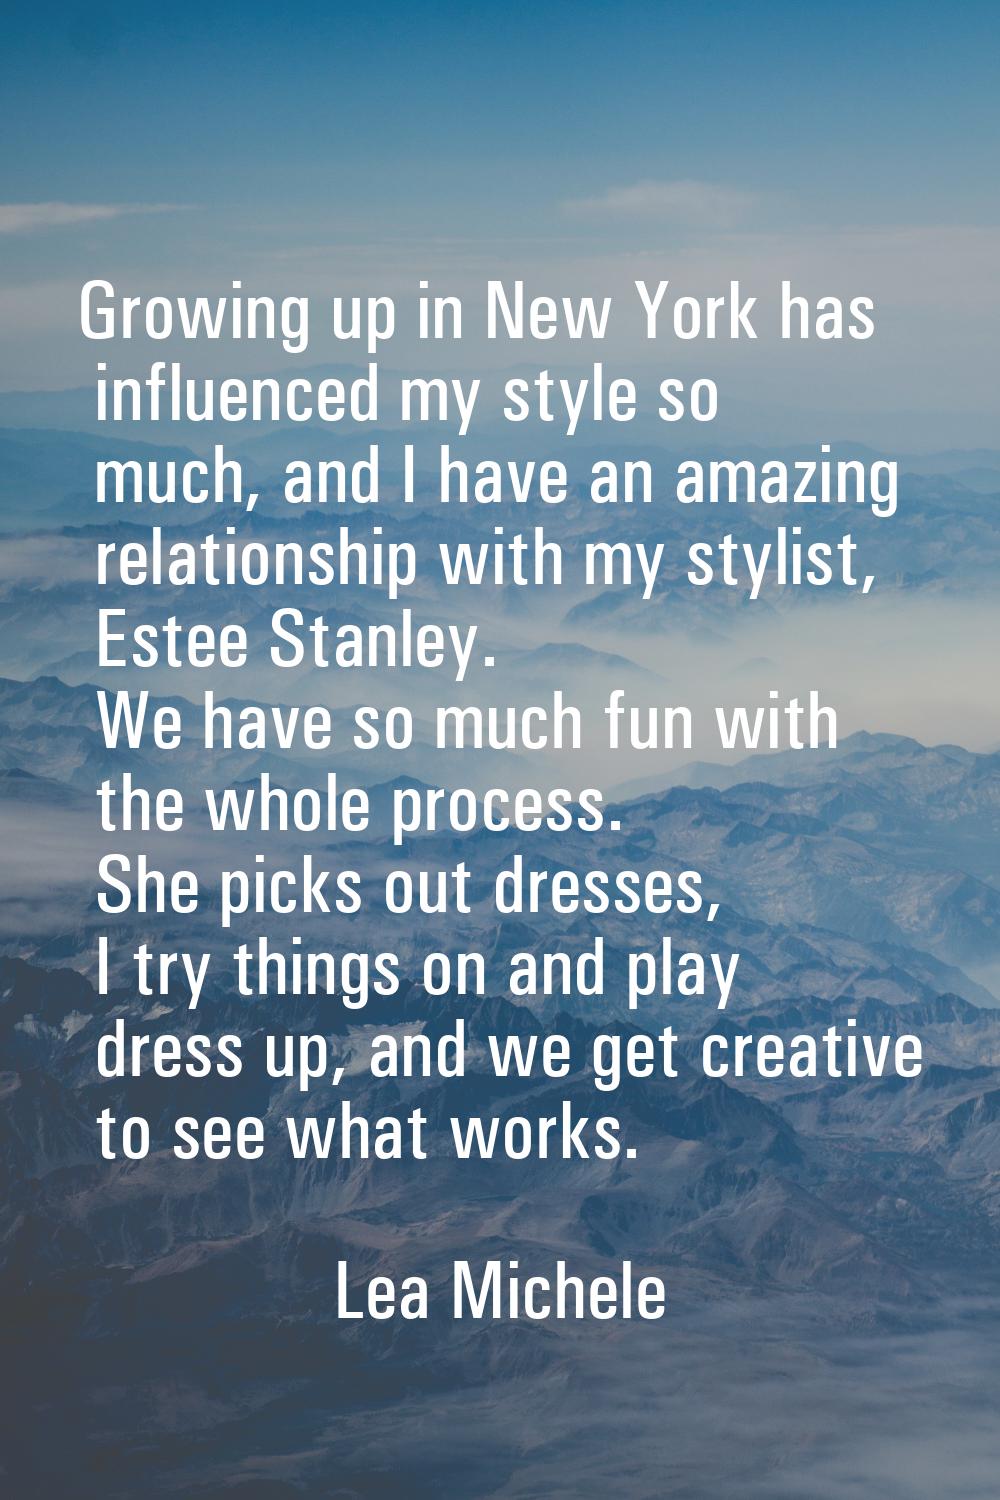 Growing up in New York has influenced my style so much, and I have an amazing relationship with my 